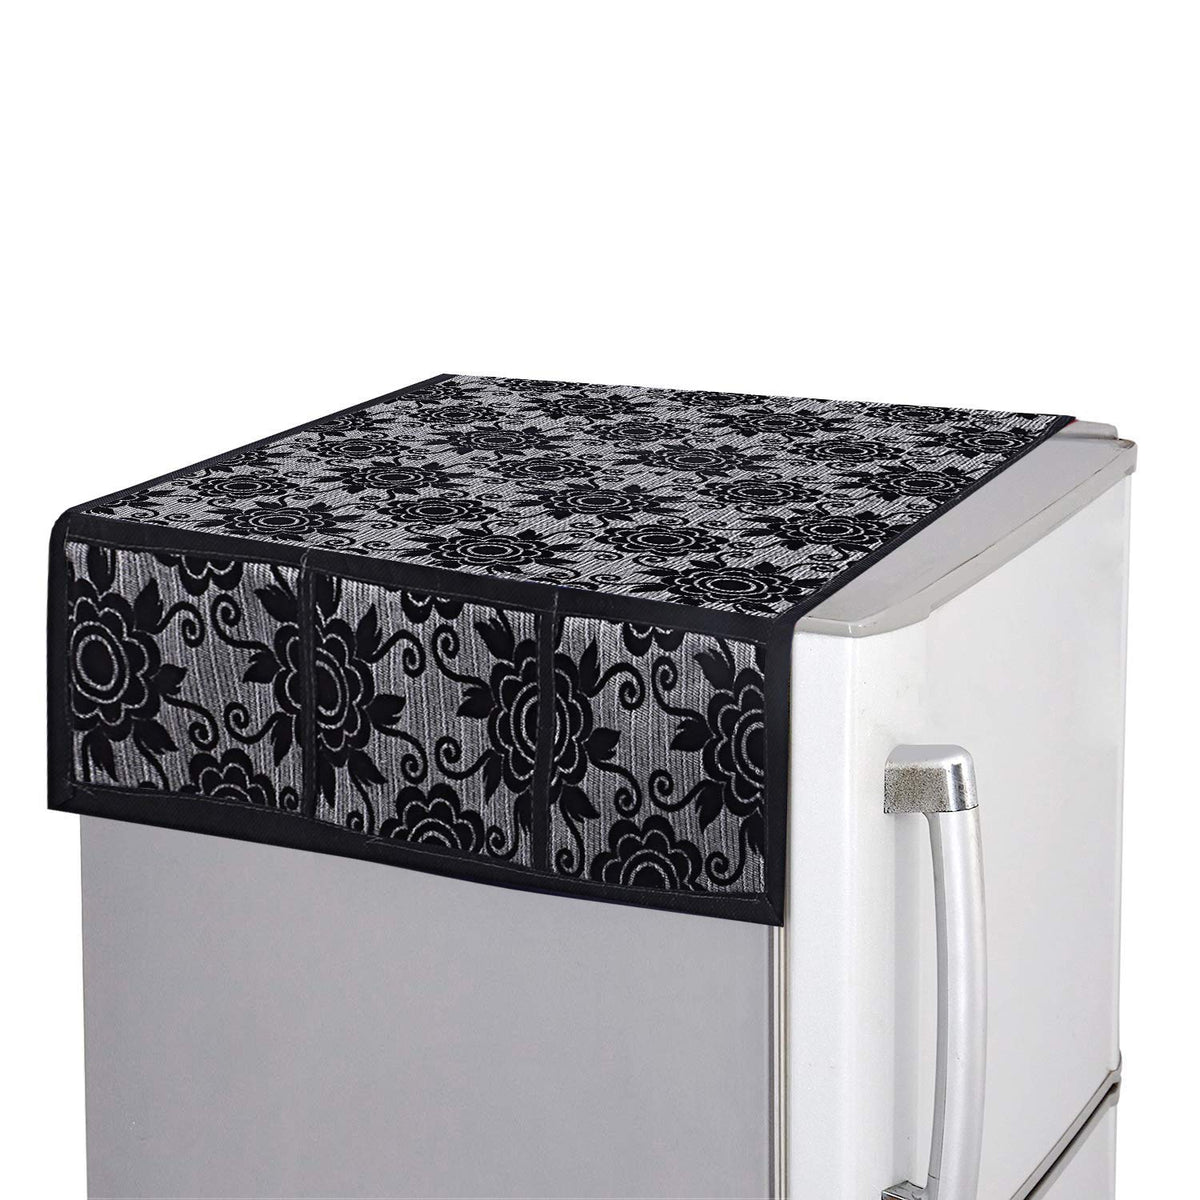 Kuber Industries Fridge Top Cover|Floral Print & Cotton Material|6 Utility Side Pockets with Plain Border|Size 94 x 54 CM, Pack of 1 (Black)